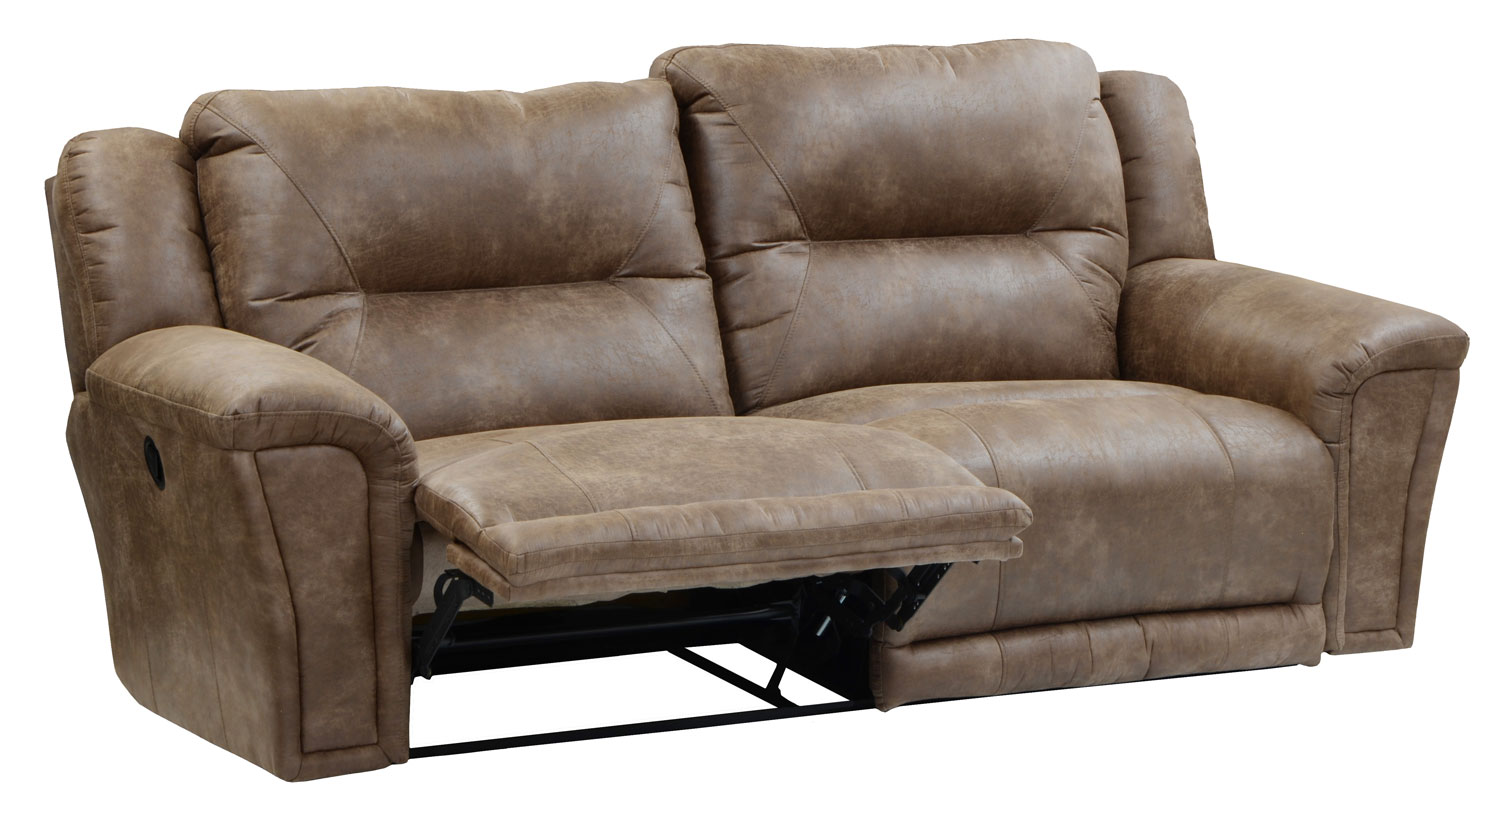 CatNapper Collin Lay Flat Reclining Sofa with X-tra Comfort Footrest - Silt